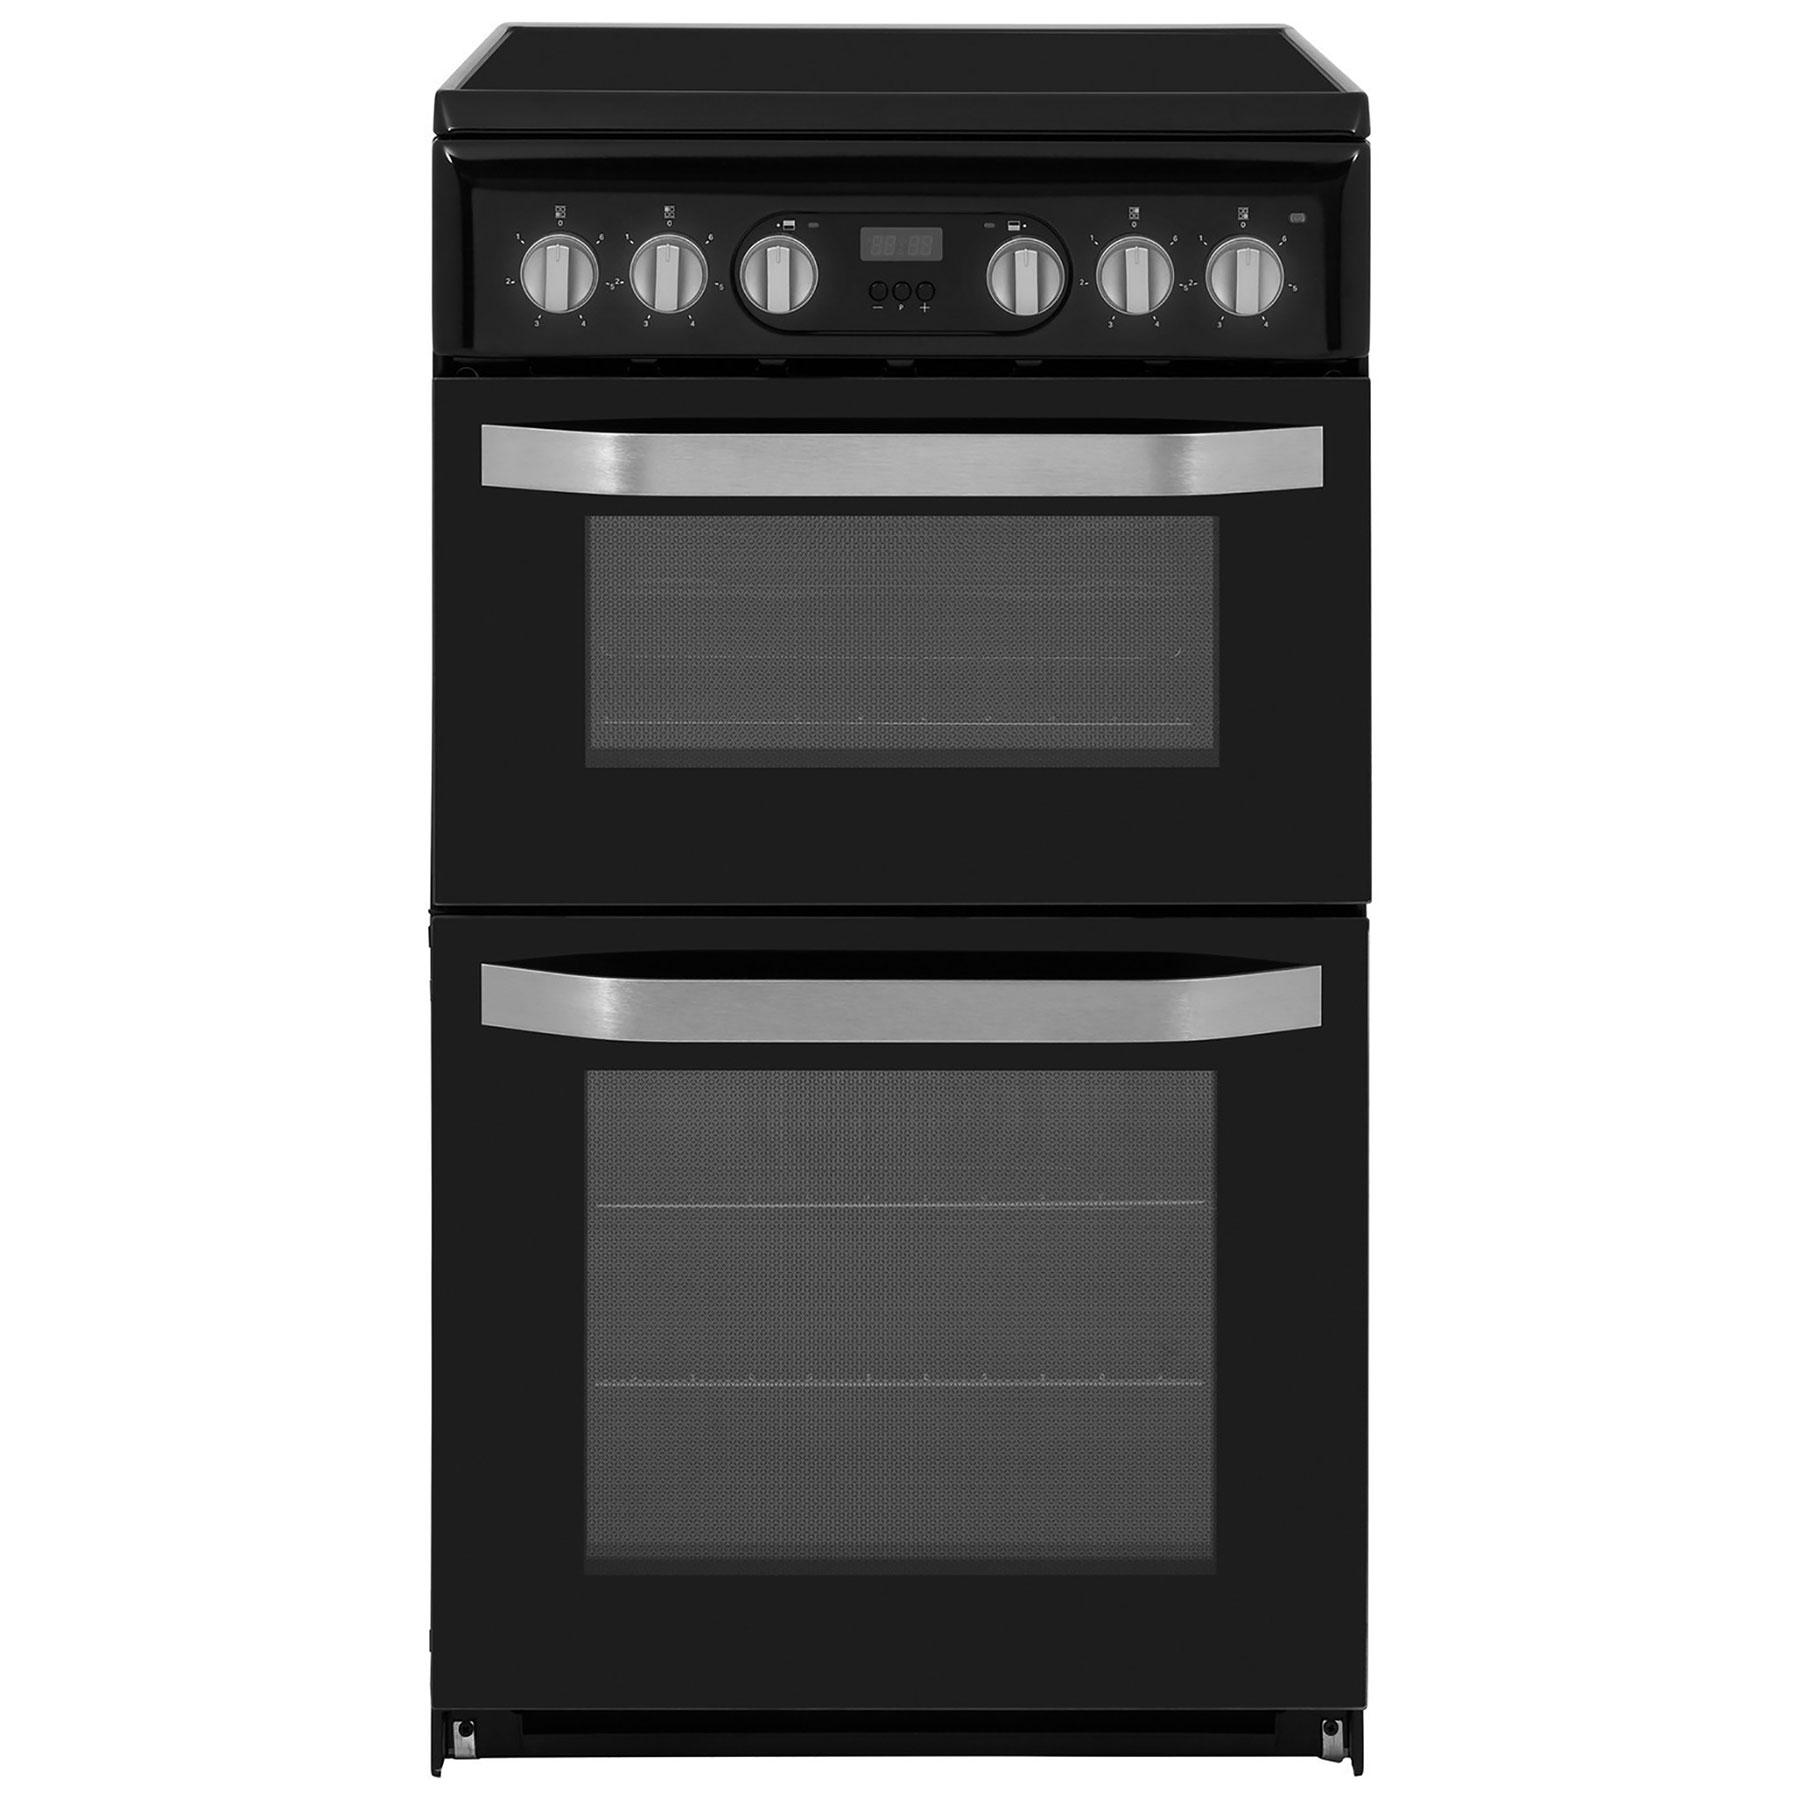 Image of Hotpoint HD5V93CCB 50cm Double Oven Electric Cooker in Black Ceramic H